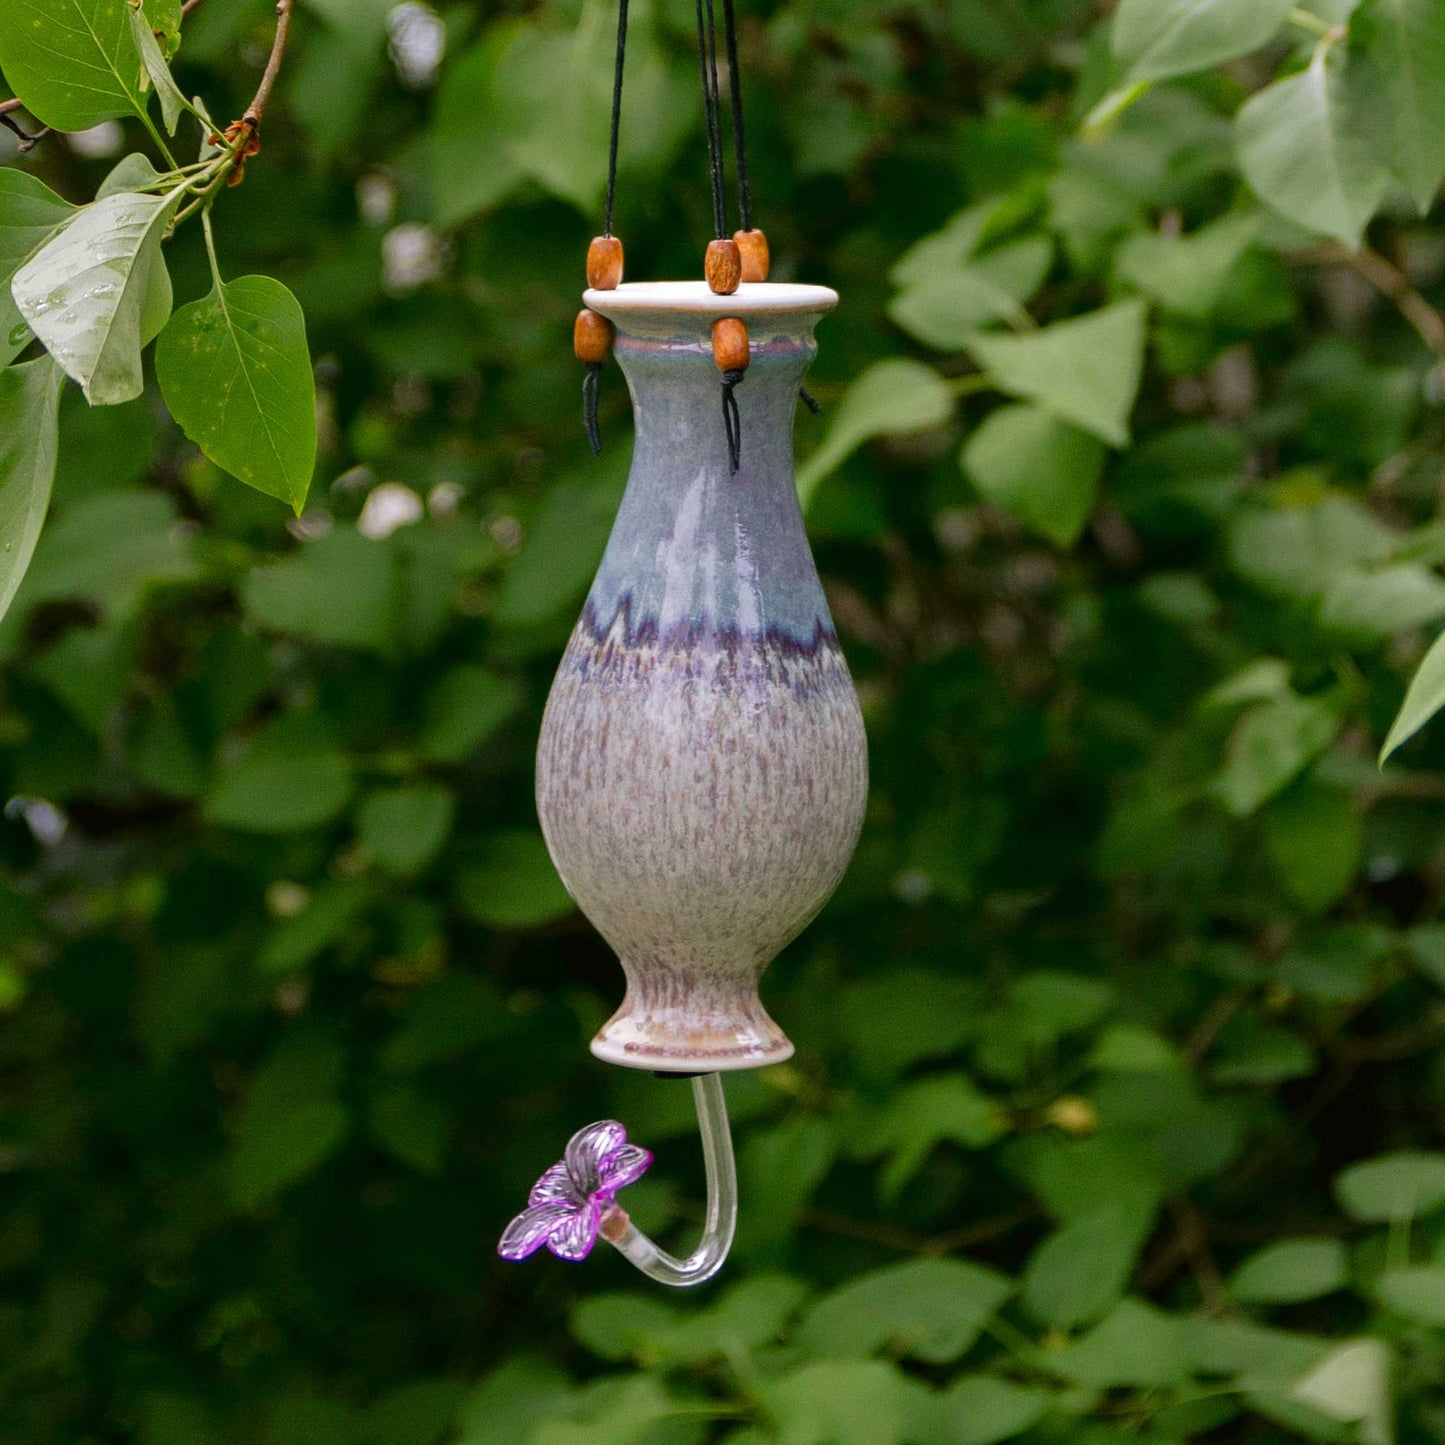 Handmade Pottery Bottle Hummingbird Feeder in Purple Nuka pattern made by Georgetown Pottery in Maine